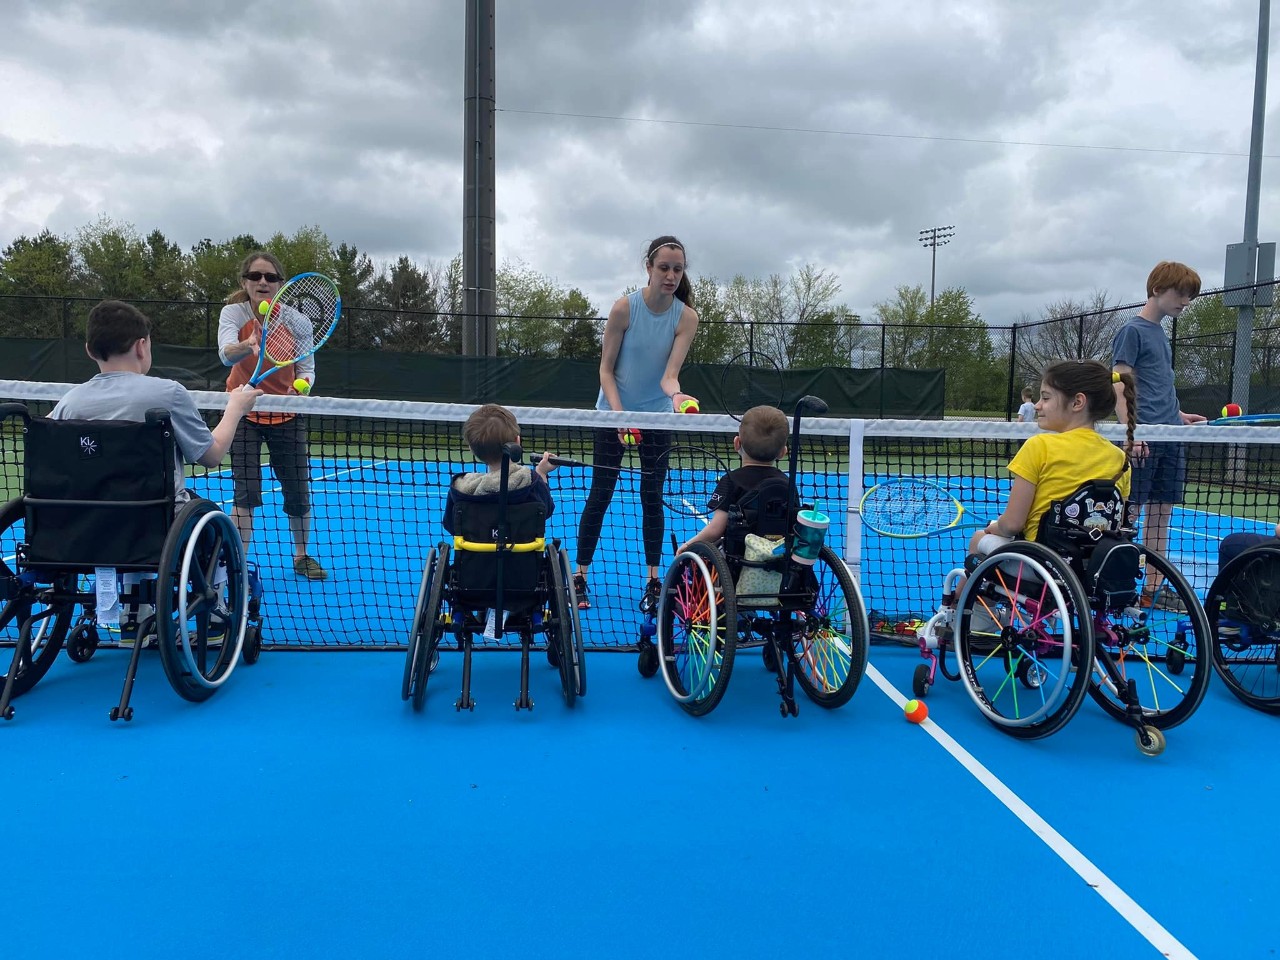 4 kids and young adults are seated in wheelchairs in front of a tennis net on a tennis court holding rackets, facing a couple of instructors